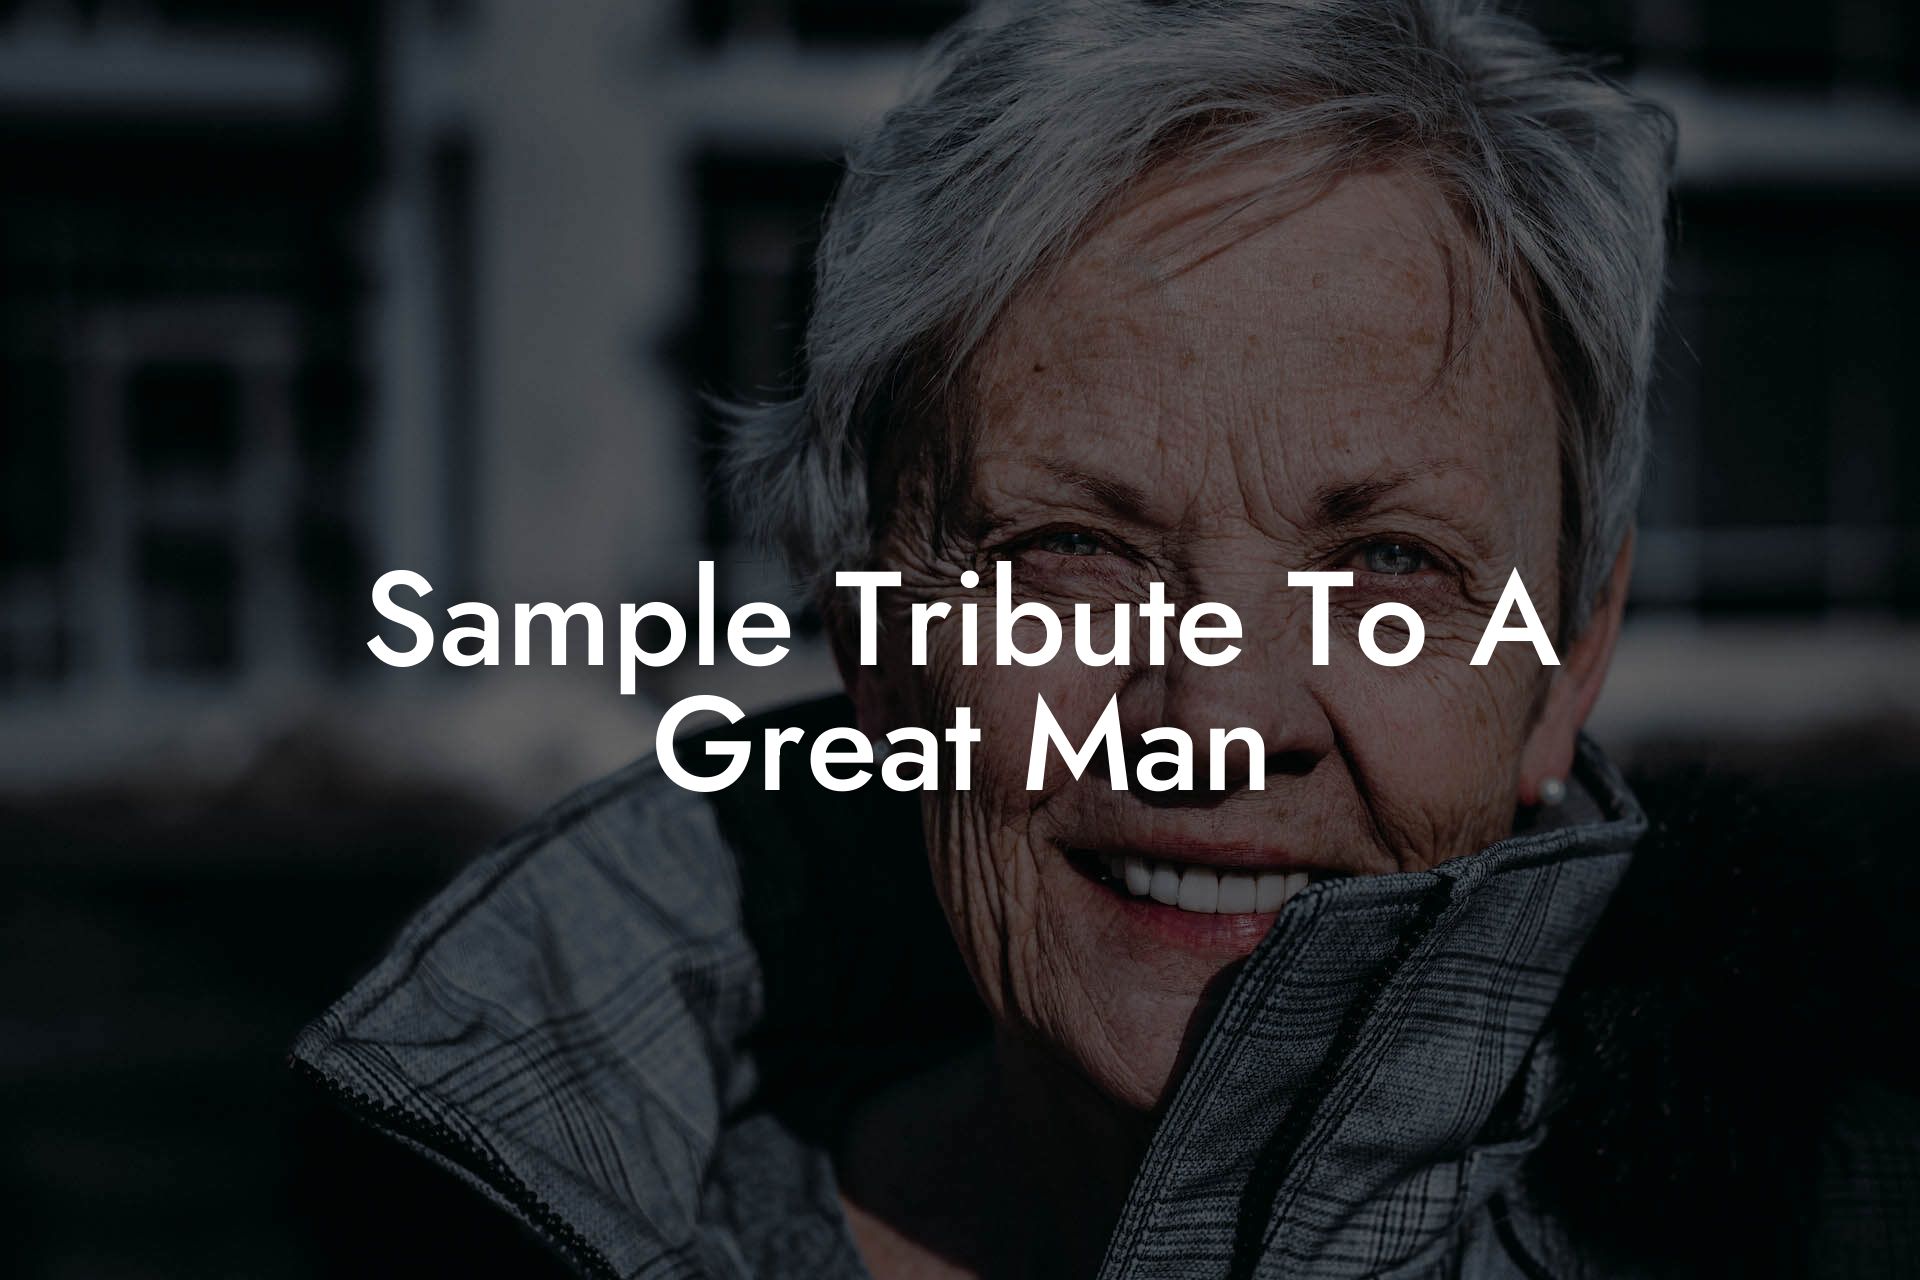 Sample Tribute To A Great Man